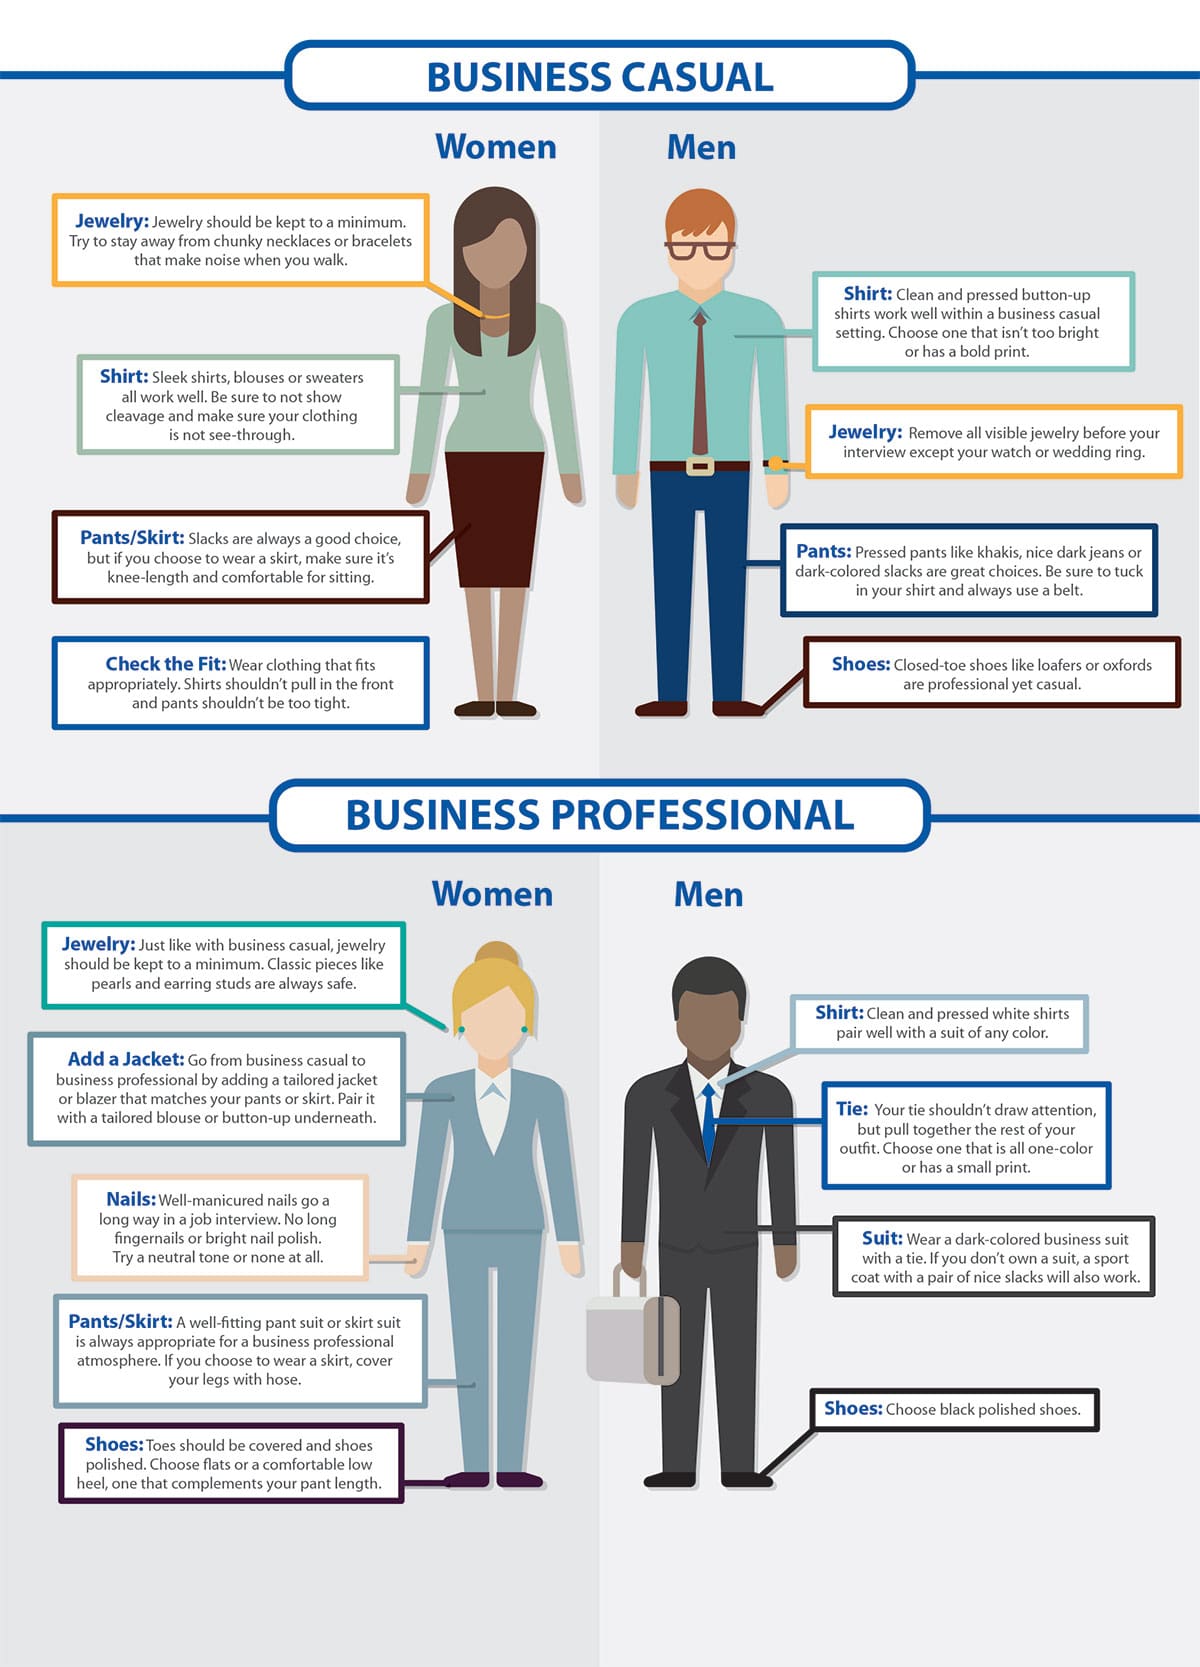 business casual examples